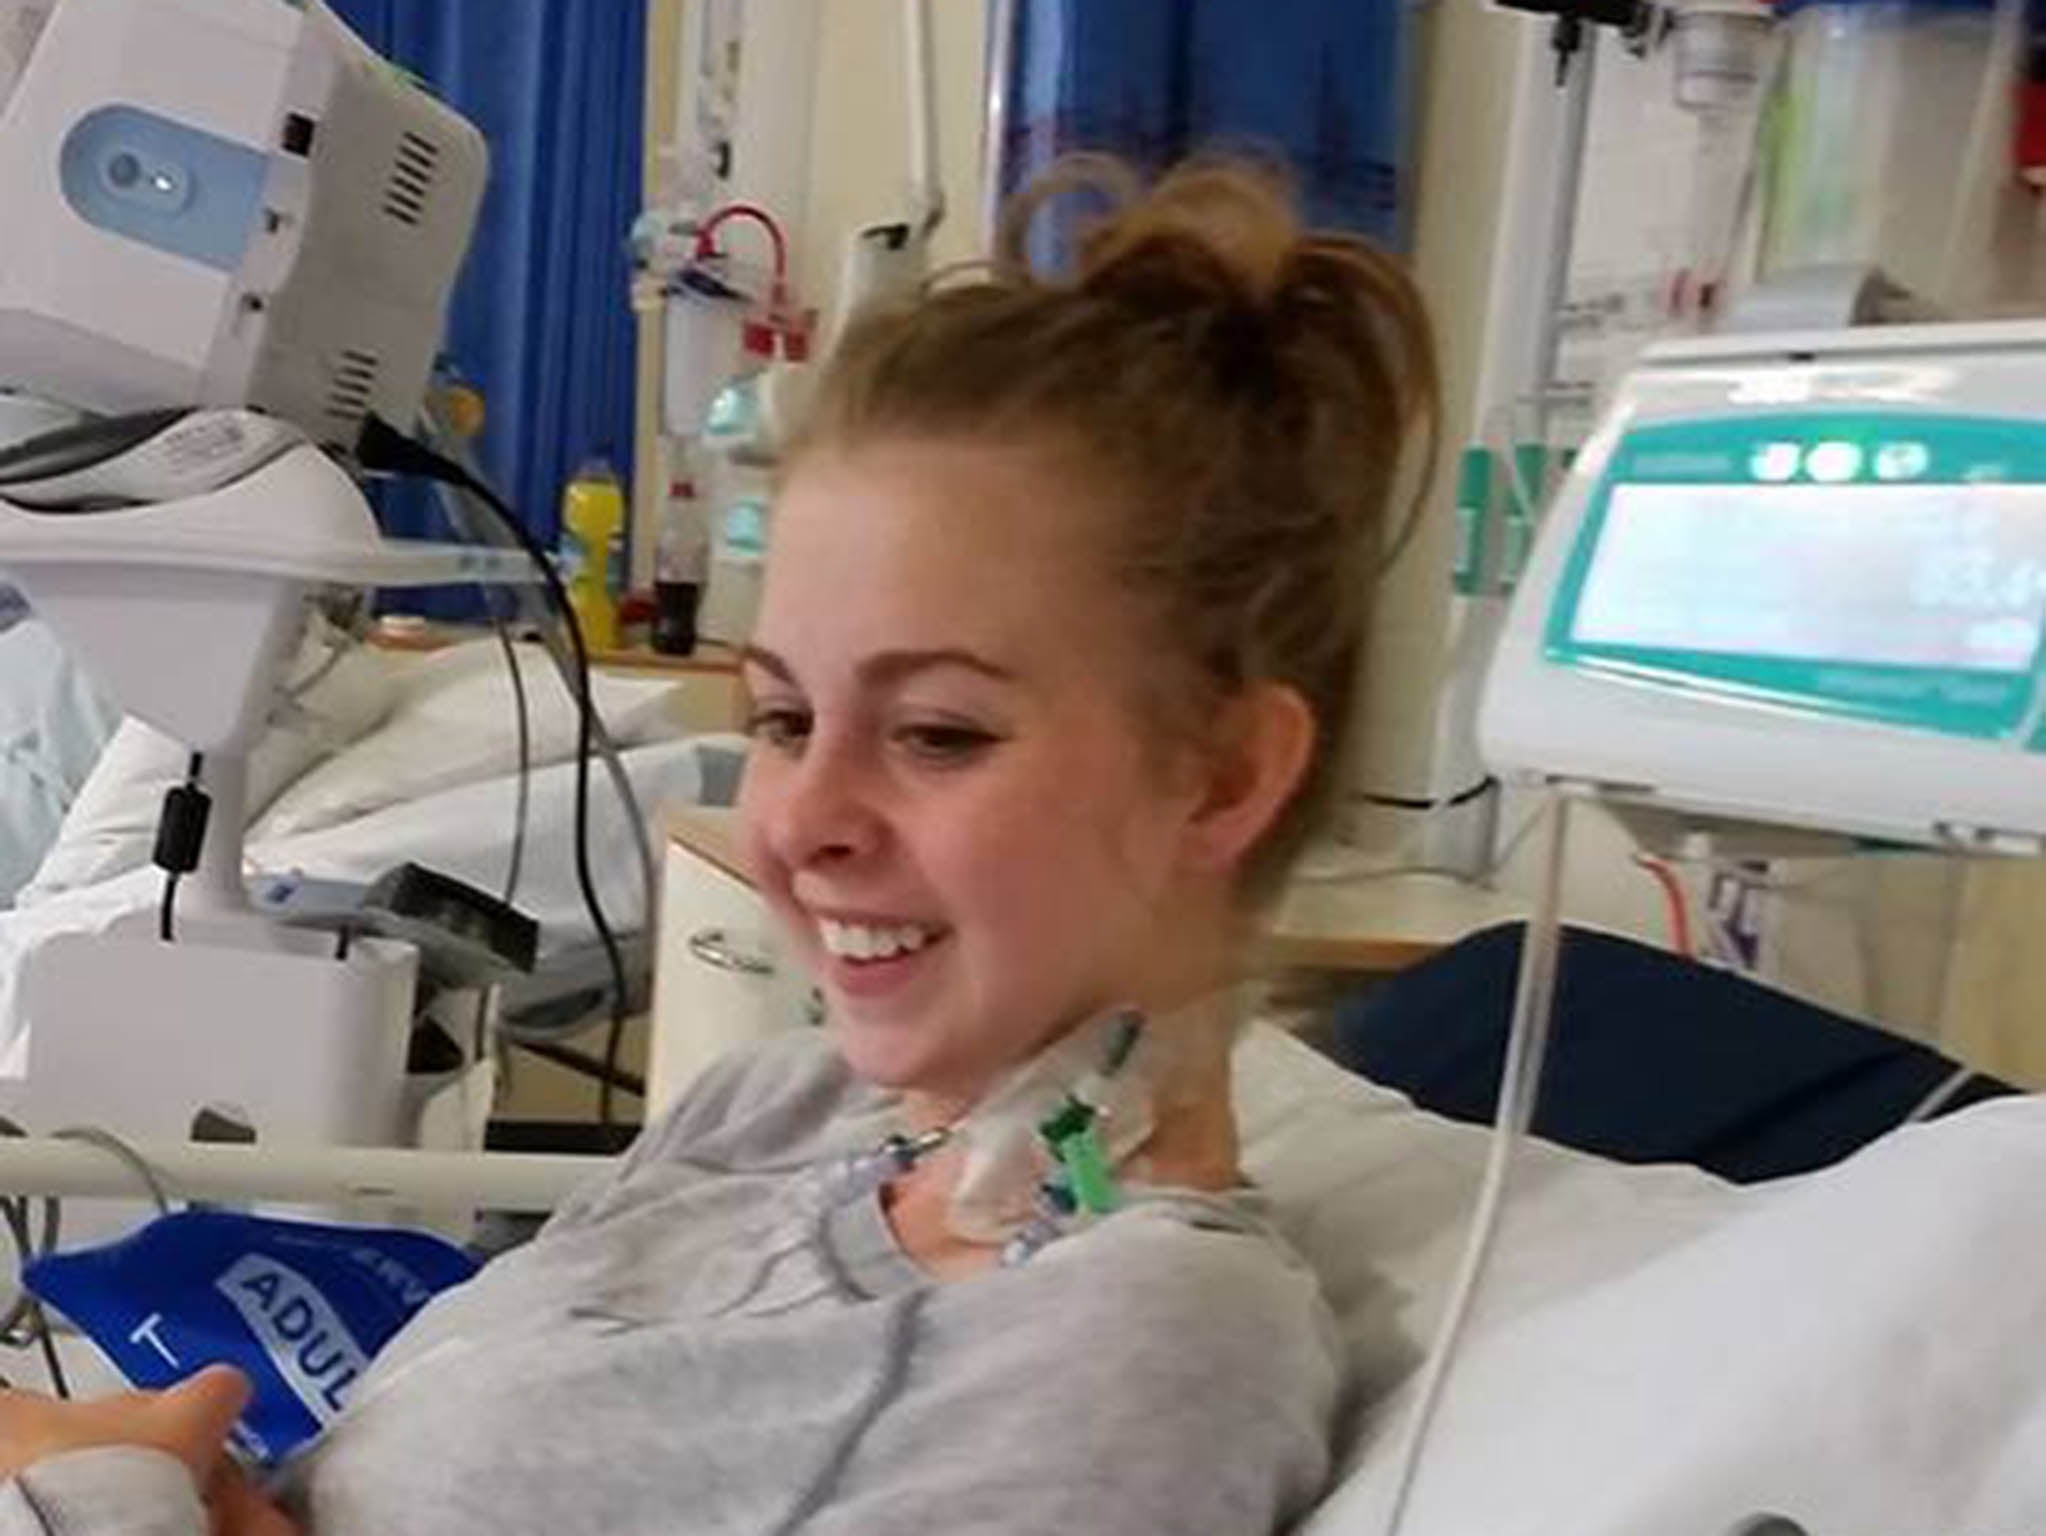 Kirsty was put into an induced coma in October, but doctors were unable to find her veins, so had to put tubes into her neck